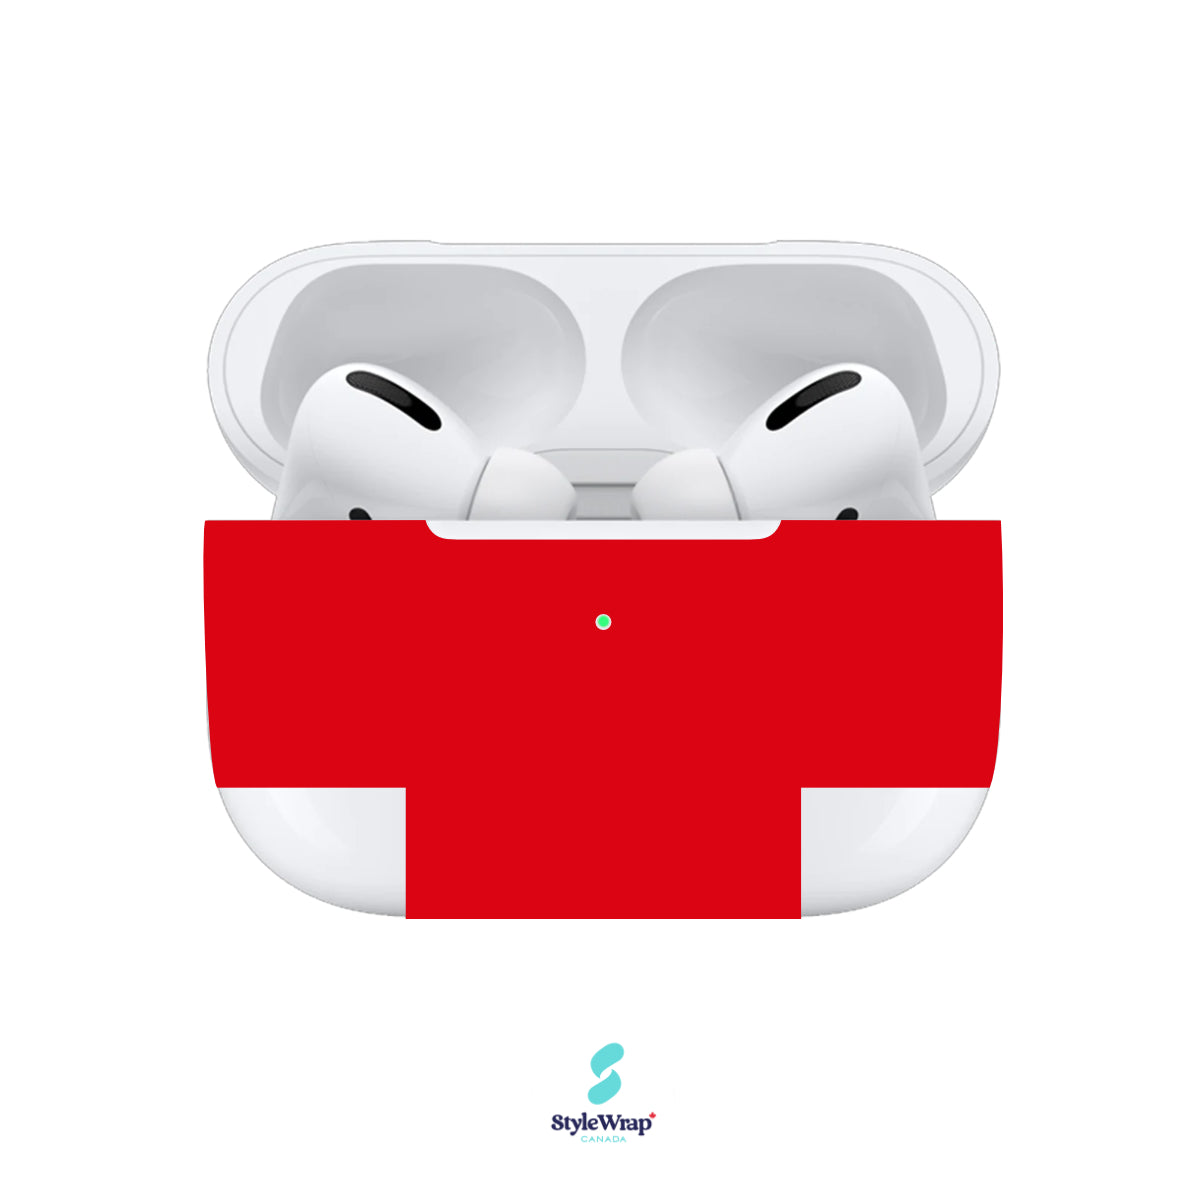 AirPods Pro skin in red